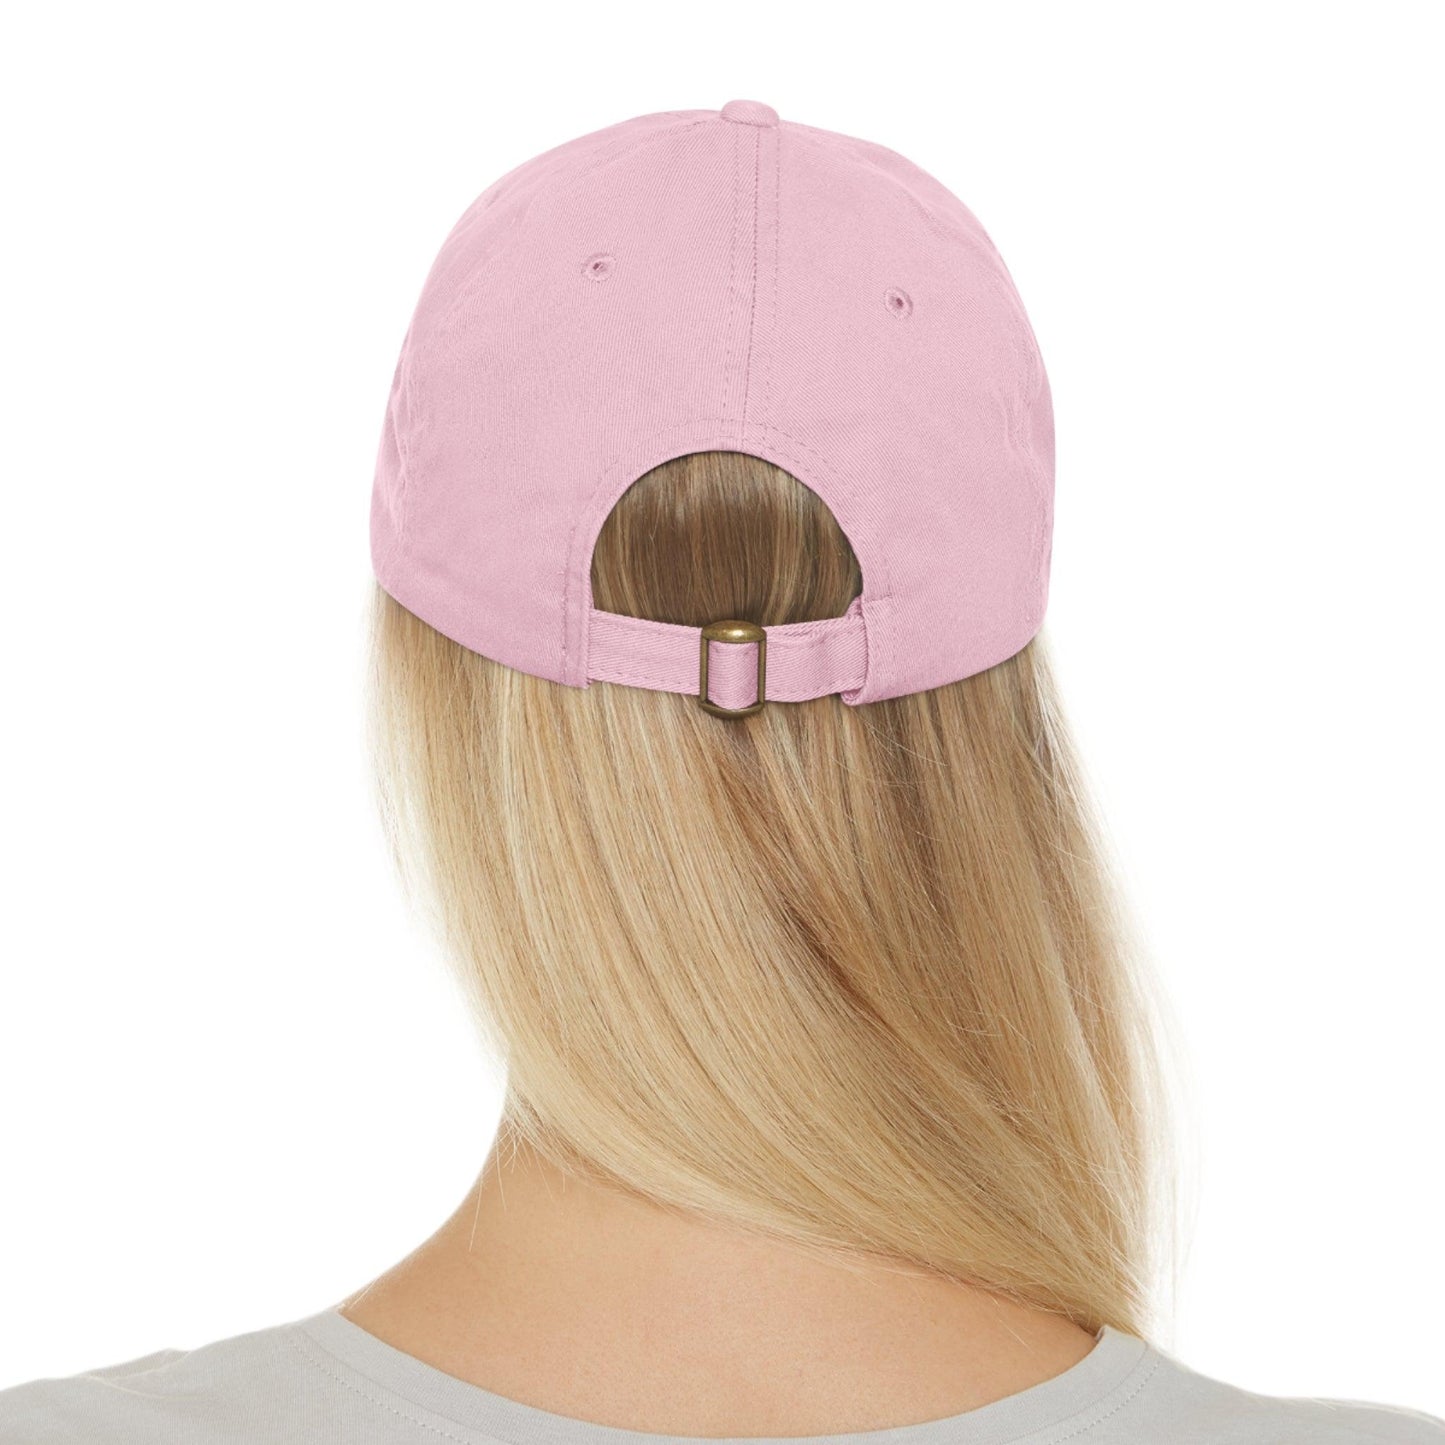 7savings Dad Hat with Leather Patch (Round) Plant lover hat